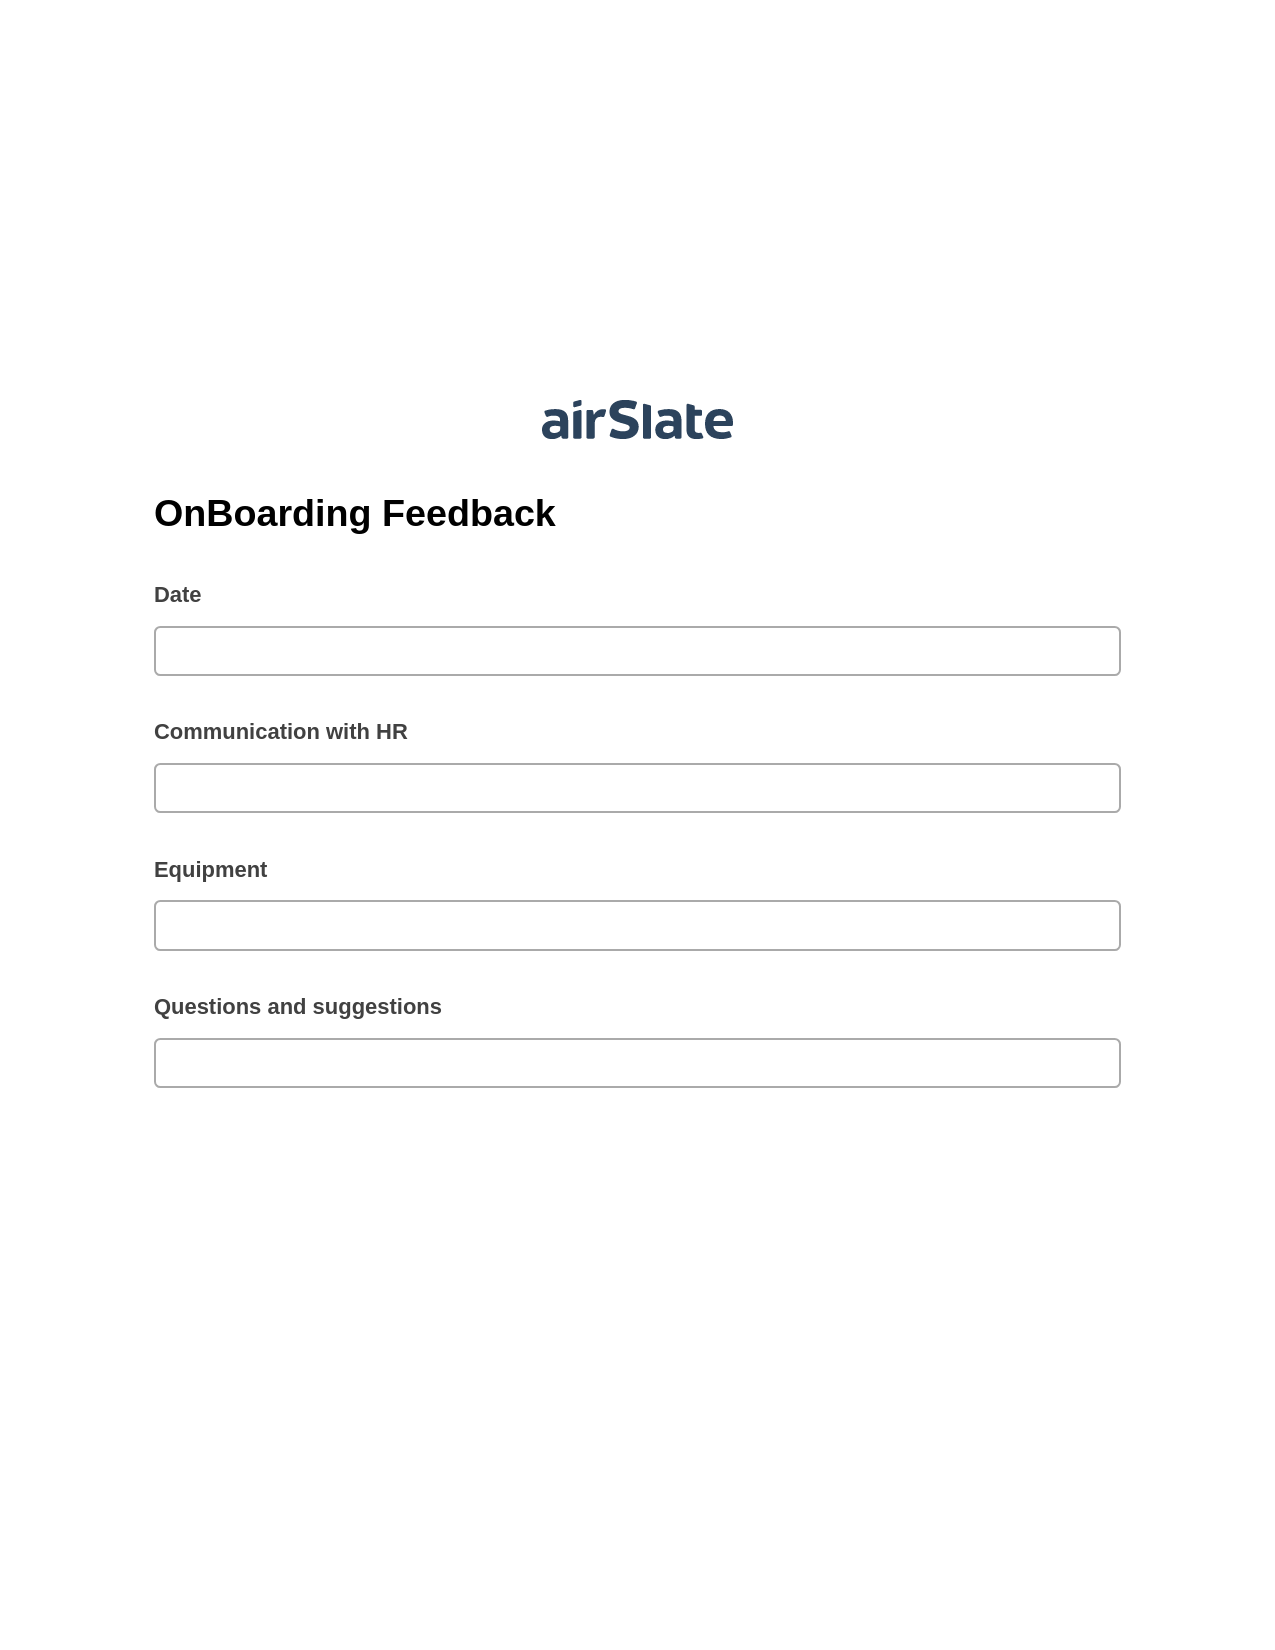 Multirole OnBoarding Feedback Pre-fill from CSV File Bot, Unassign Role Bot, Export to Salesforce Bot